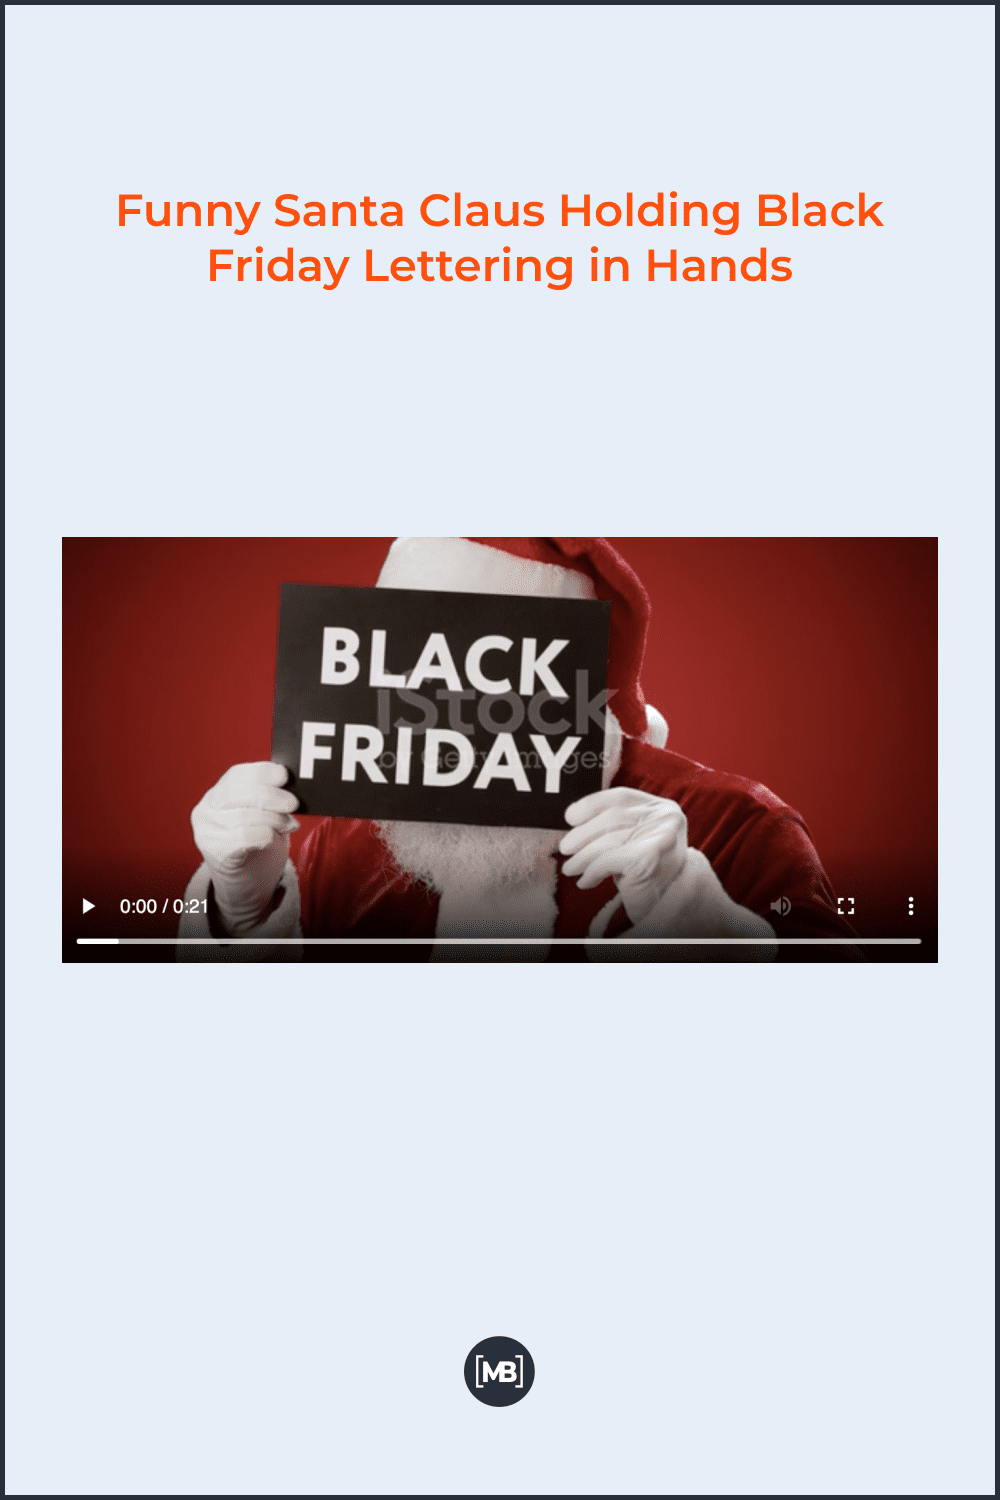 Funny Santa Claus holding Black Friday lettering in hands.